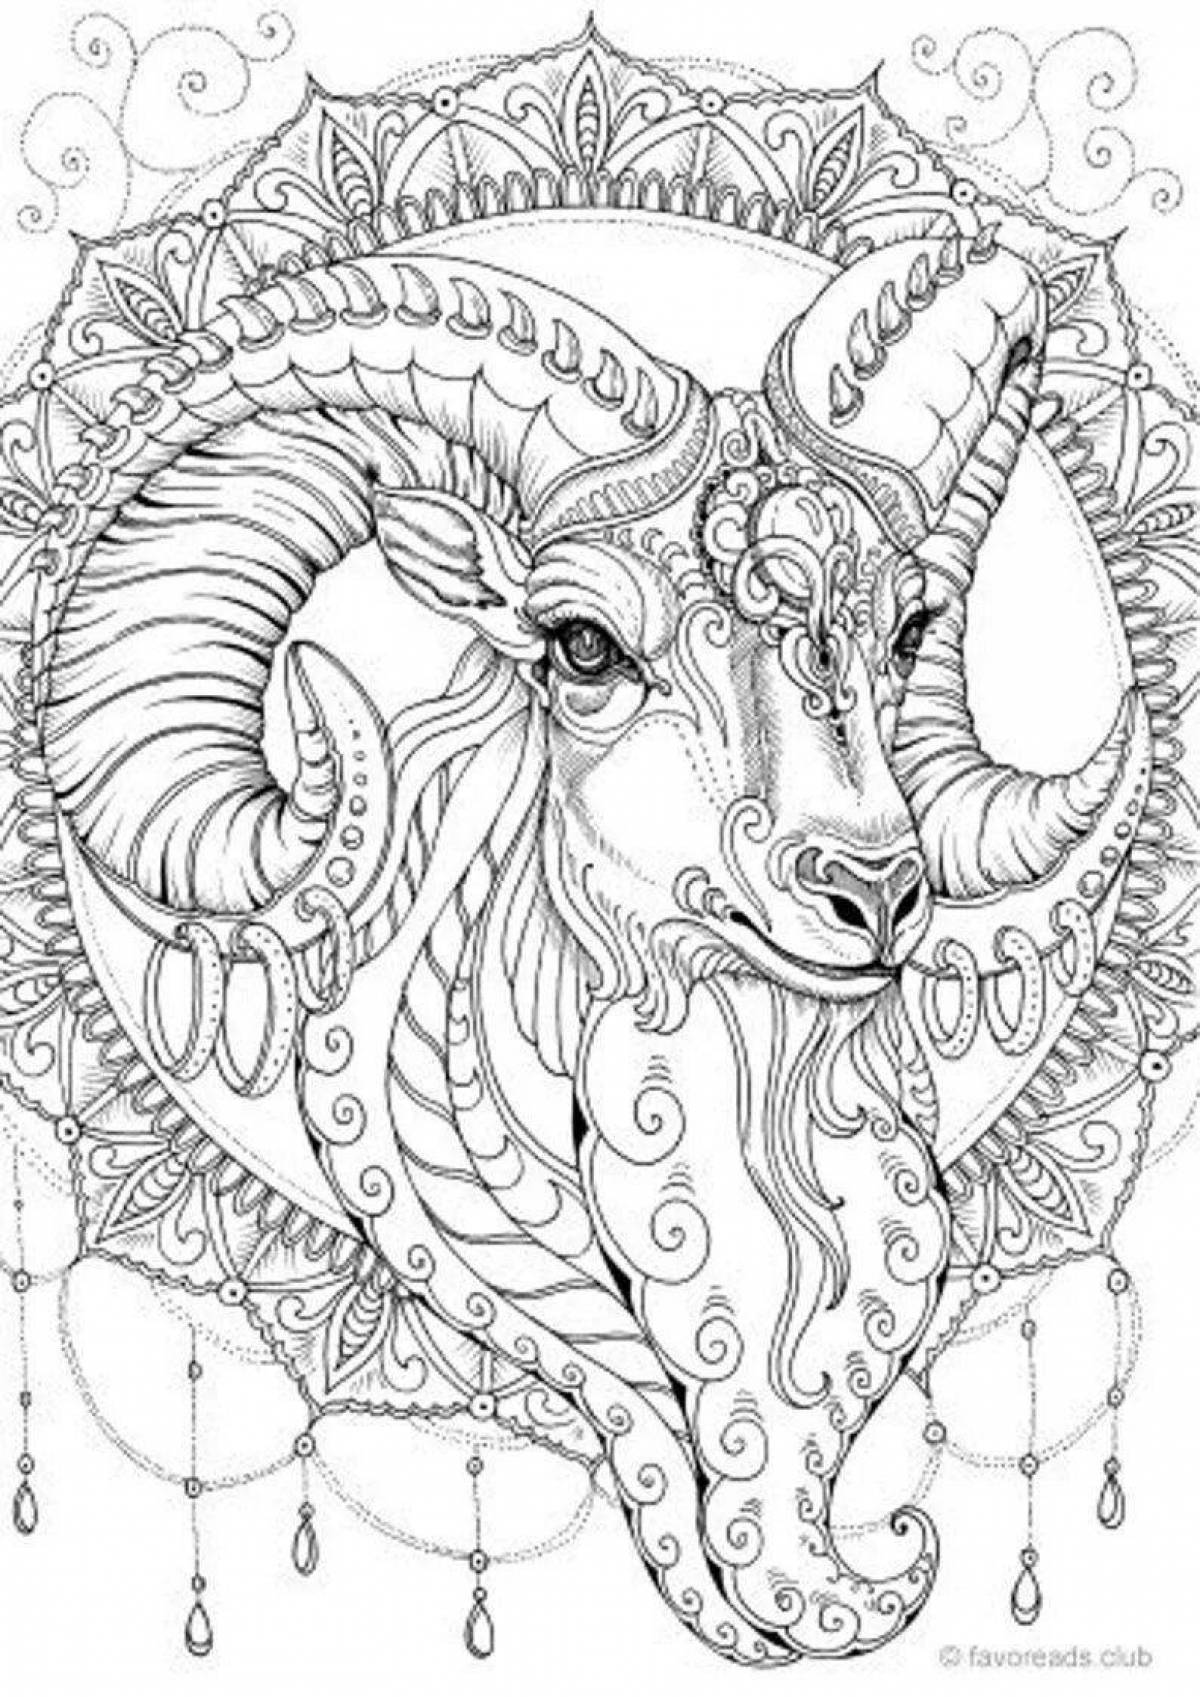 Blissful coloring book antistress zodiac signs